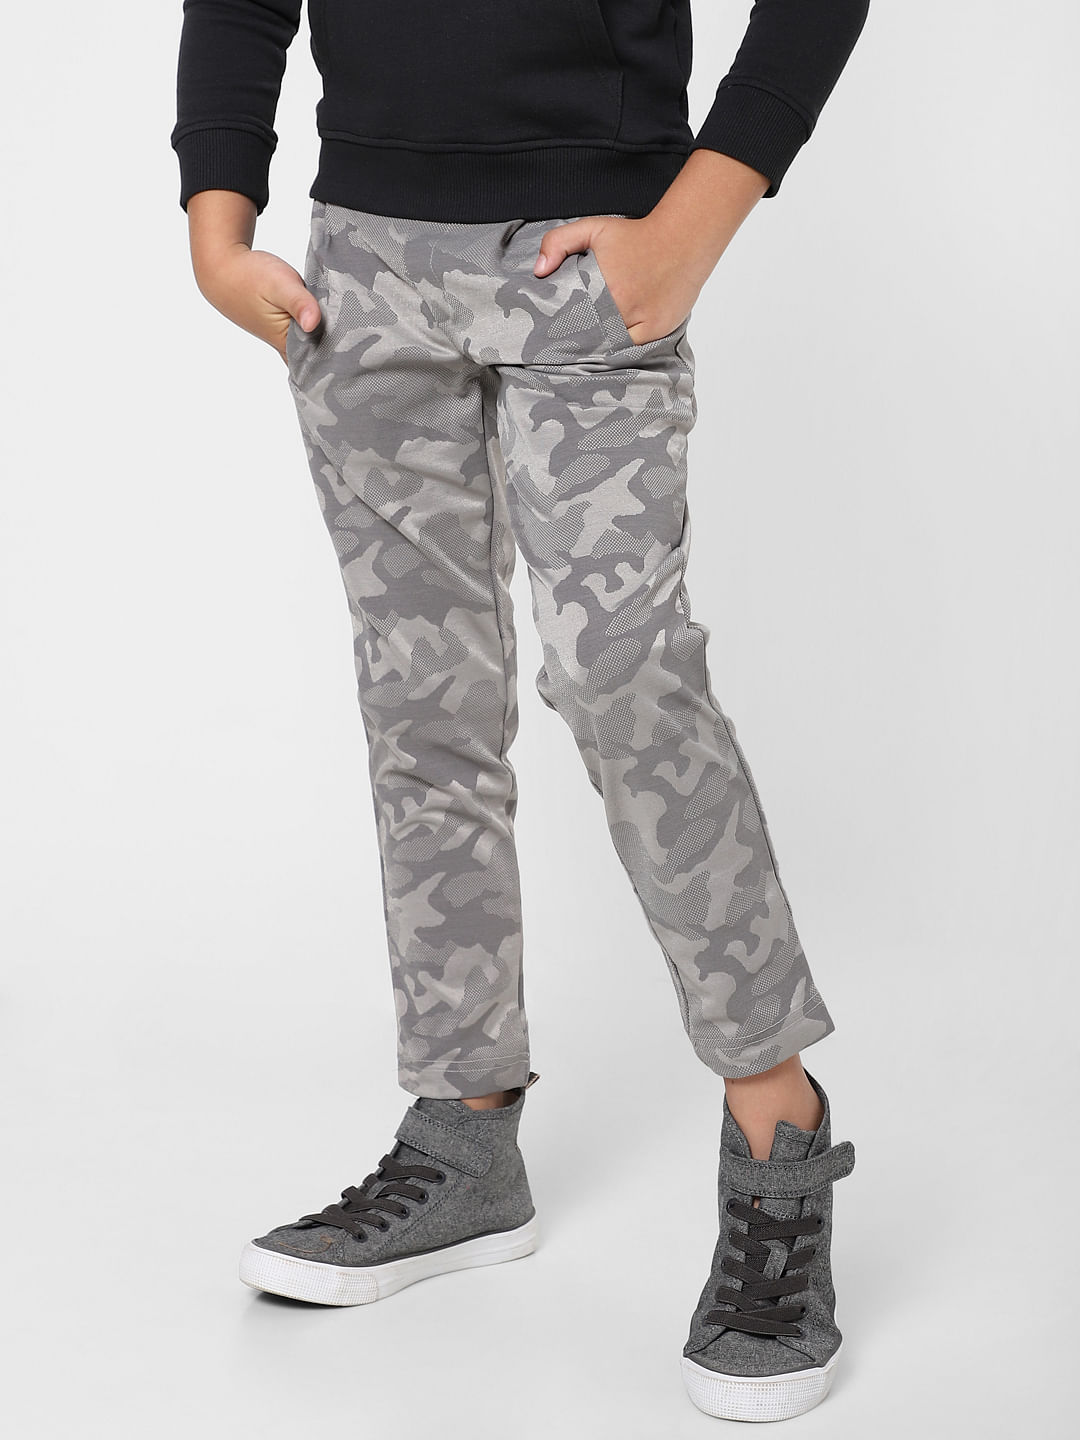 Buy Plus Size Grey Camouflage Printed Lounge Pants Online For Women